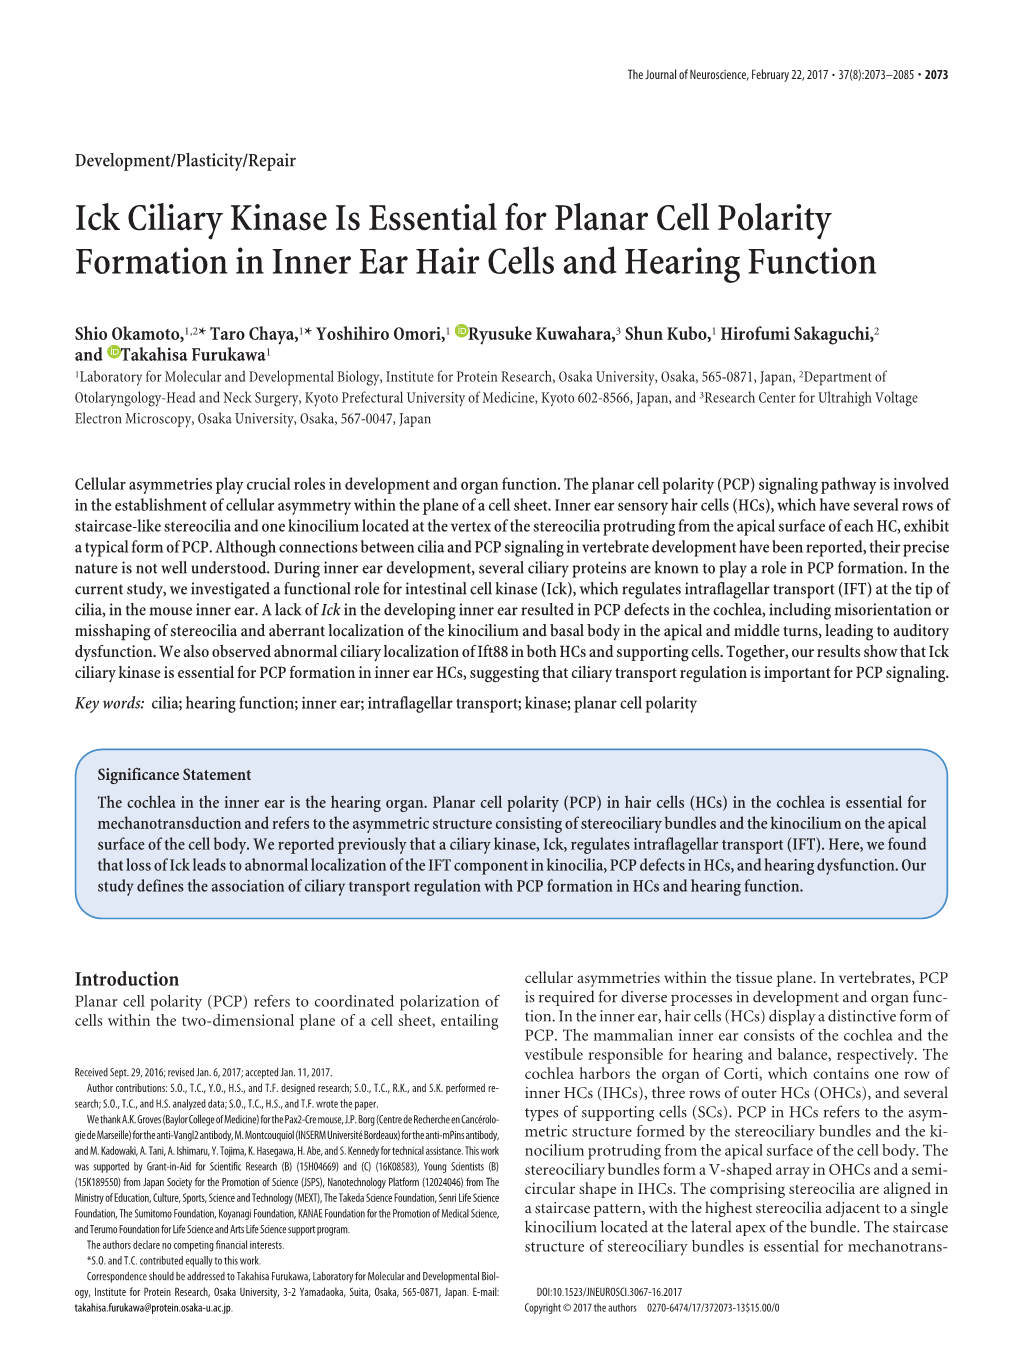 Ick Ciliary Kinase Is Essential for Planar Cell Polarity Formation in Inner Ear Hair Cells and Hearing Function